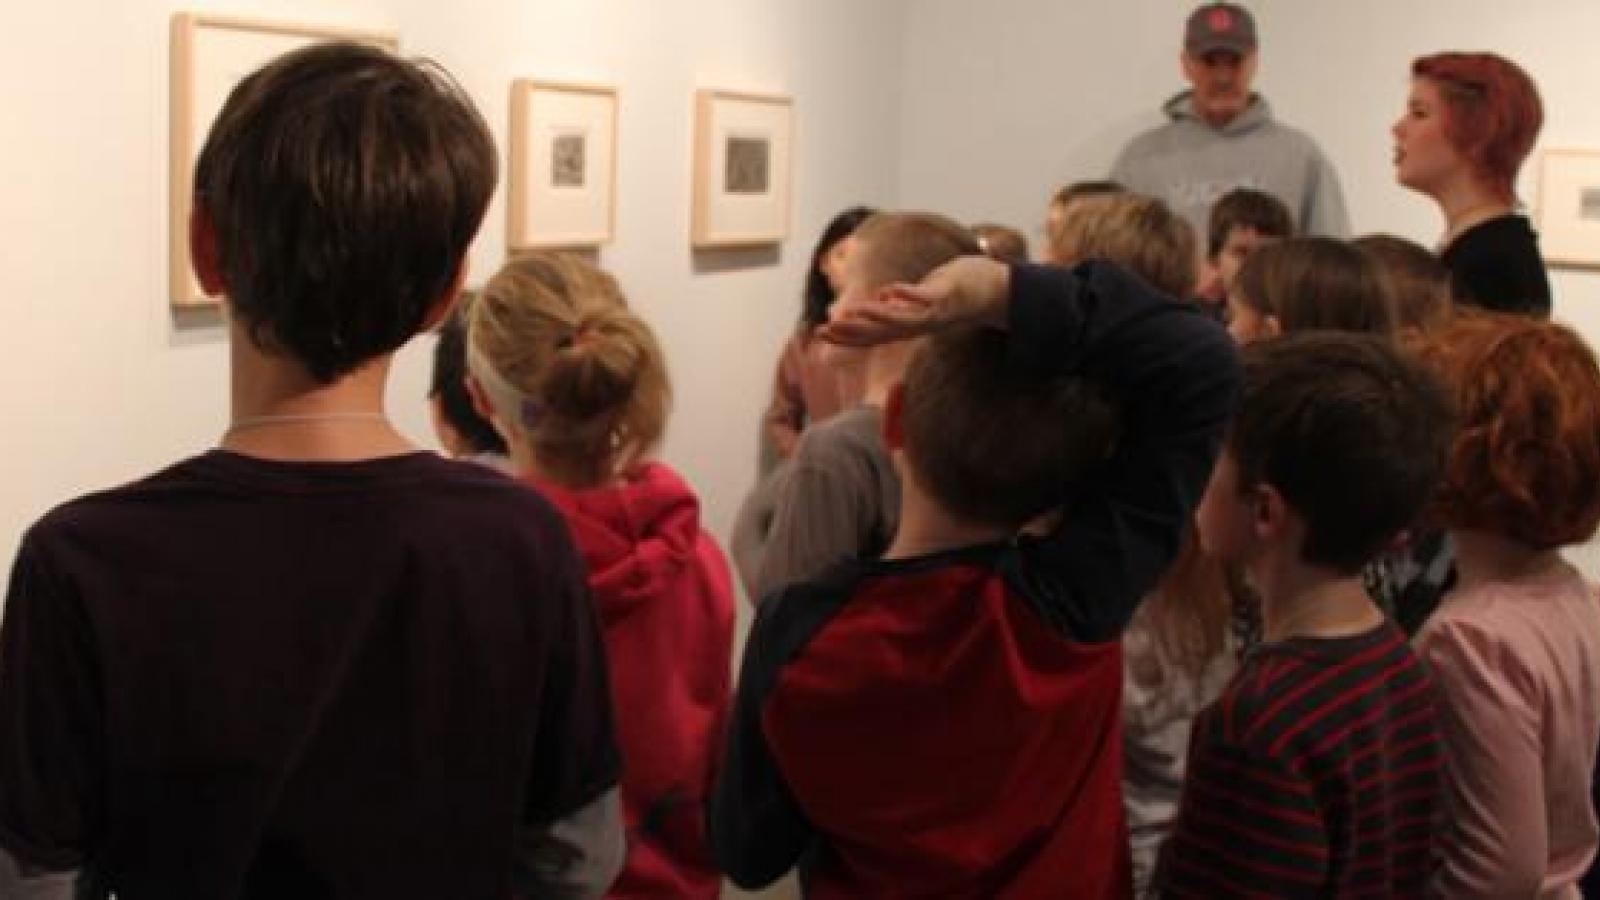 A group of people observe paintings on a gallery wall.